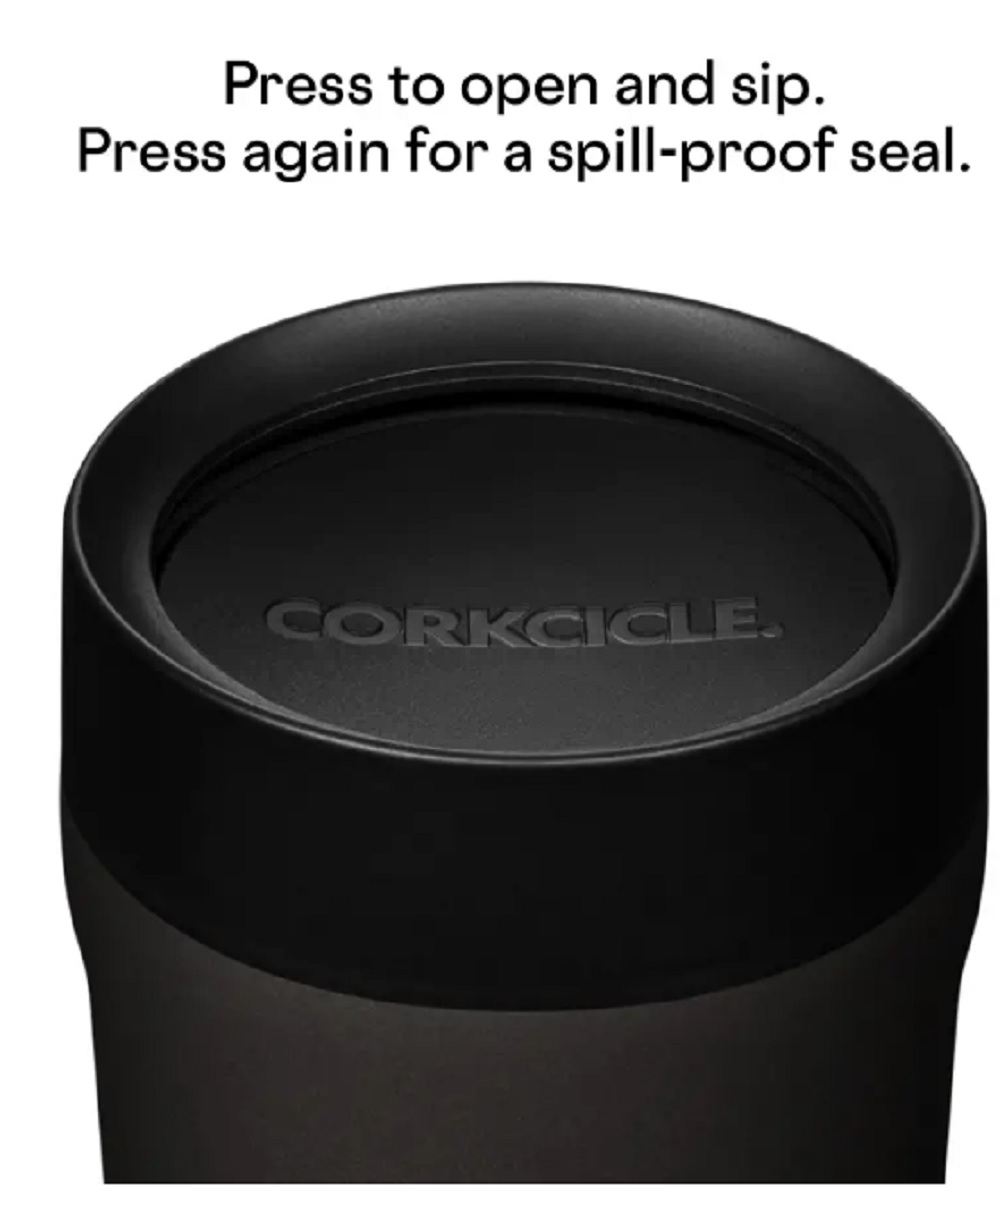 Corkcicle 17oz. Gloss Midnight Navy Commuter Spill-proof Insulated Travel Coffee Mug